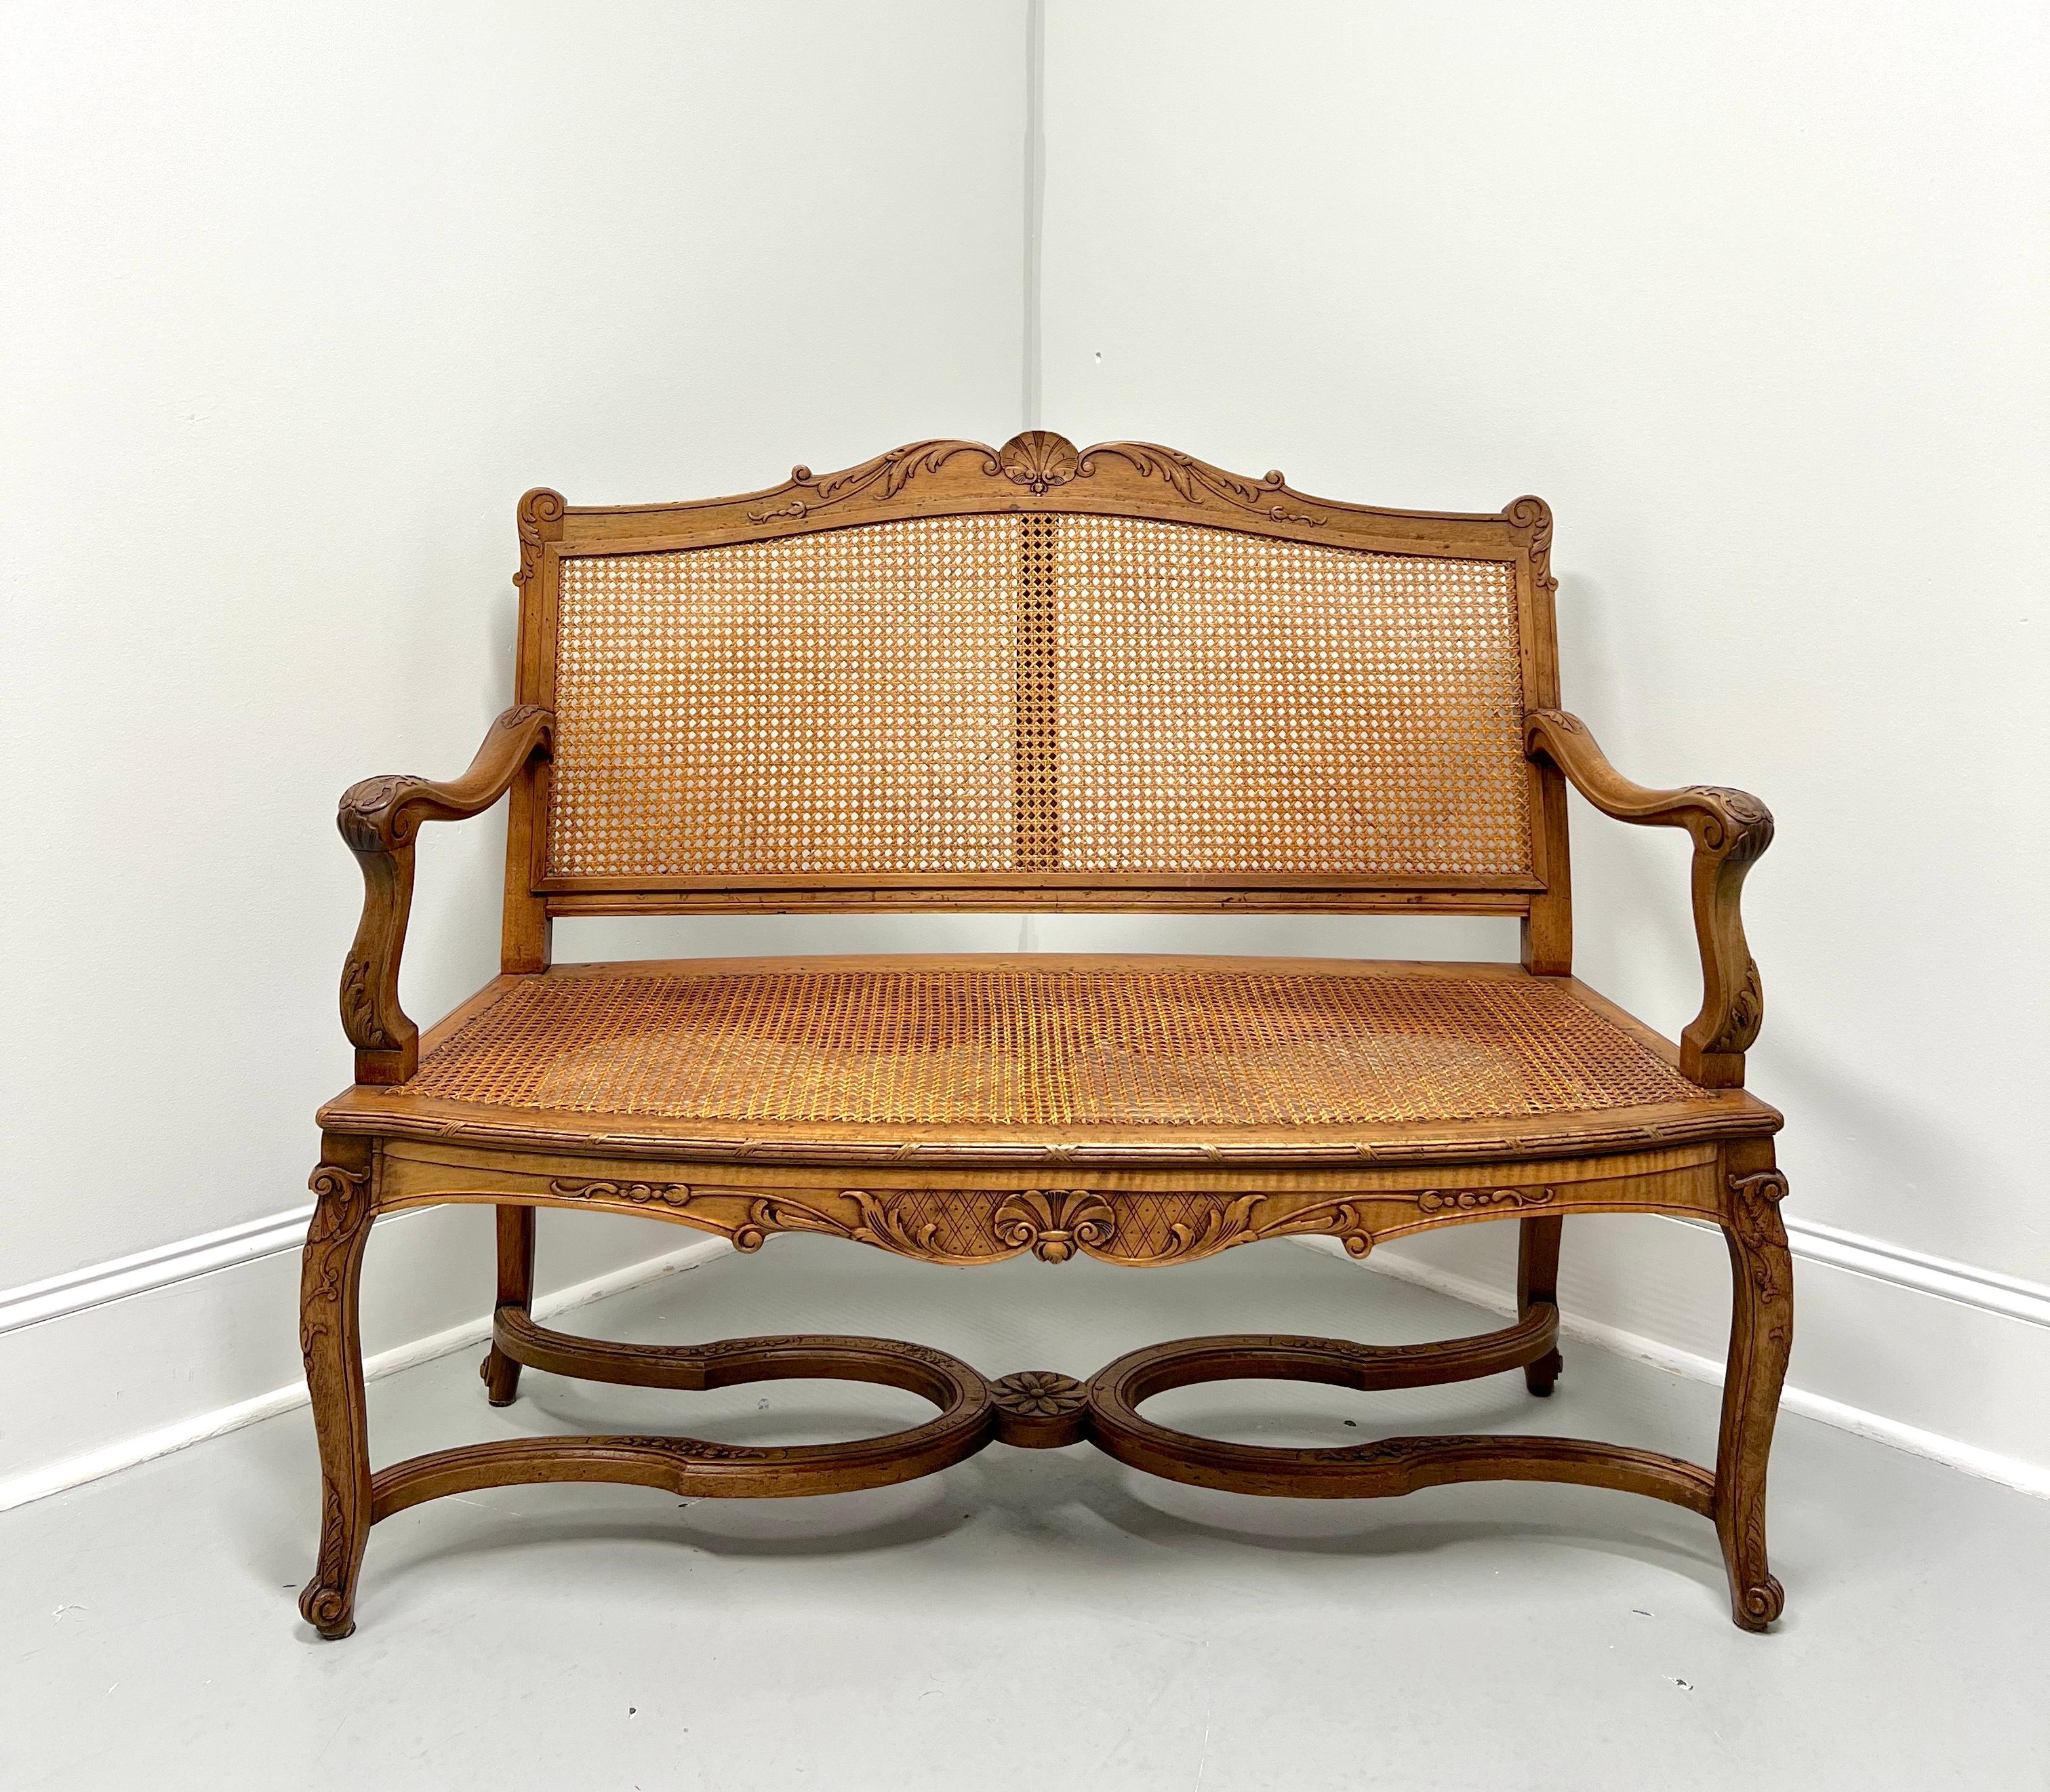 An antique French Provincial Louis XV style caned settee, unbranded. Solid fruitwood with decoratively carved crestrail, caning to the back, curved carved arms with carved supports, caning to the seat, carved apron & knees, dual carved U-shaped